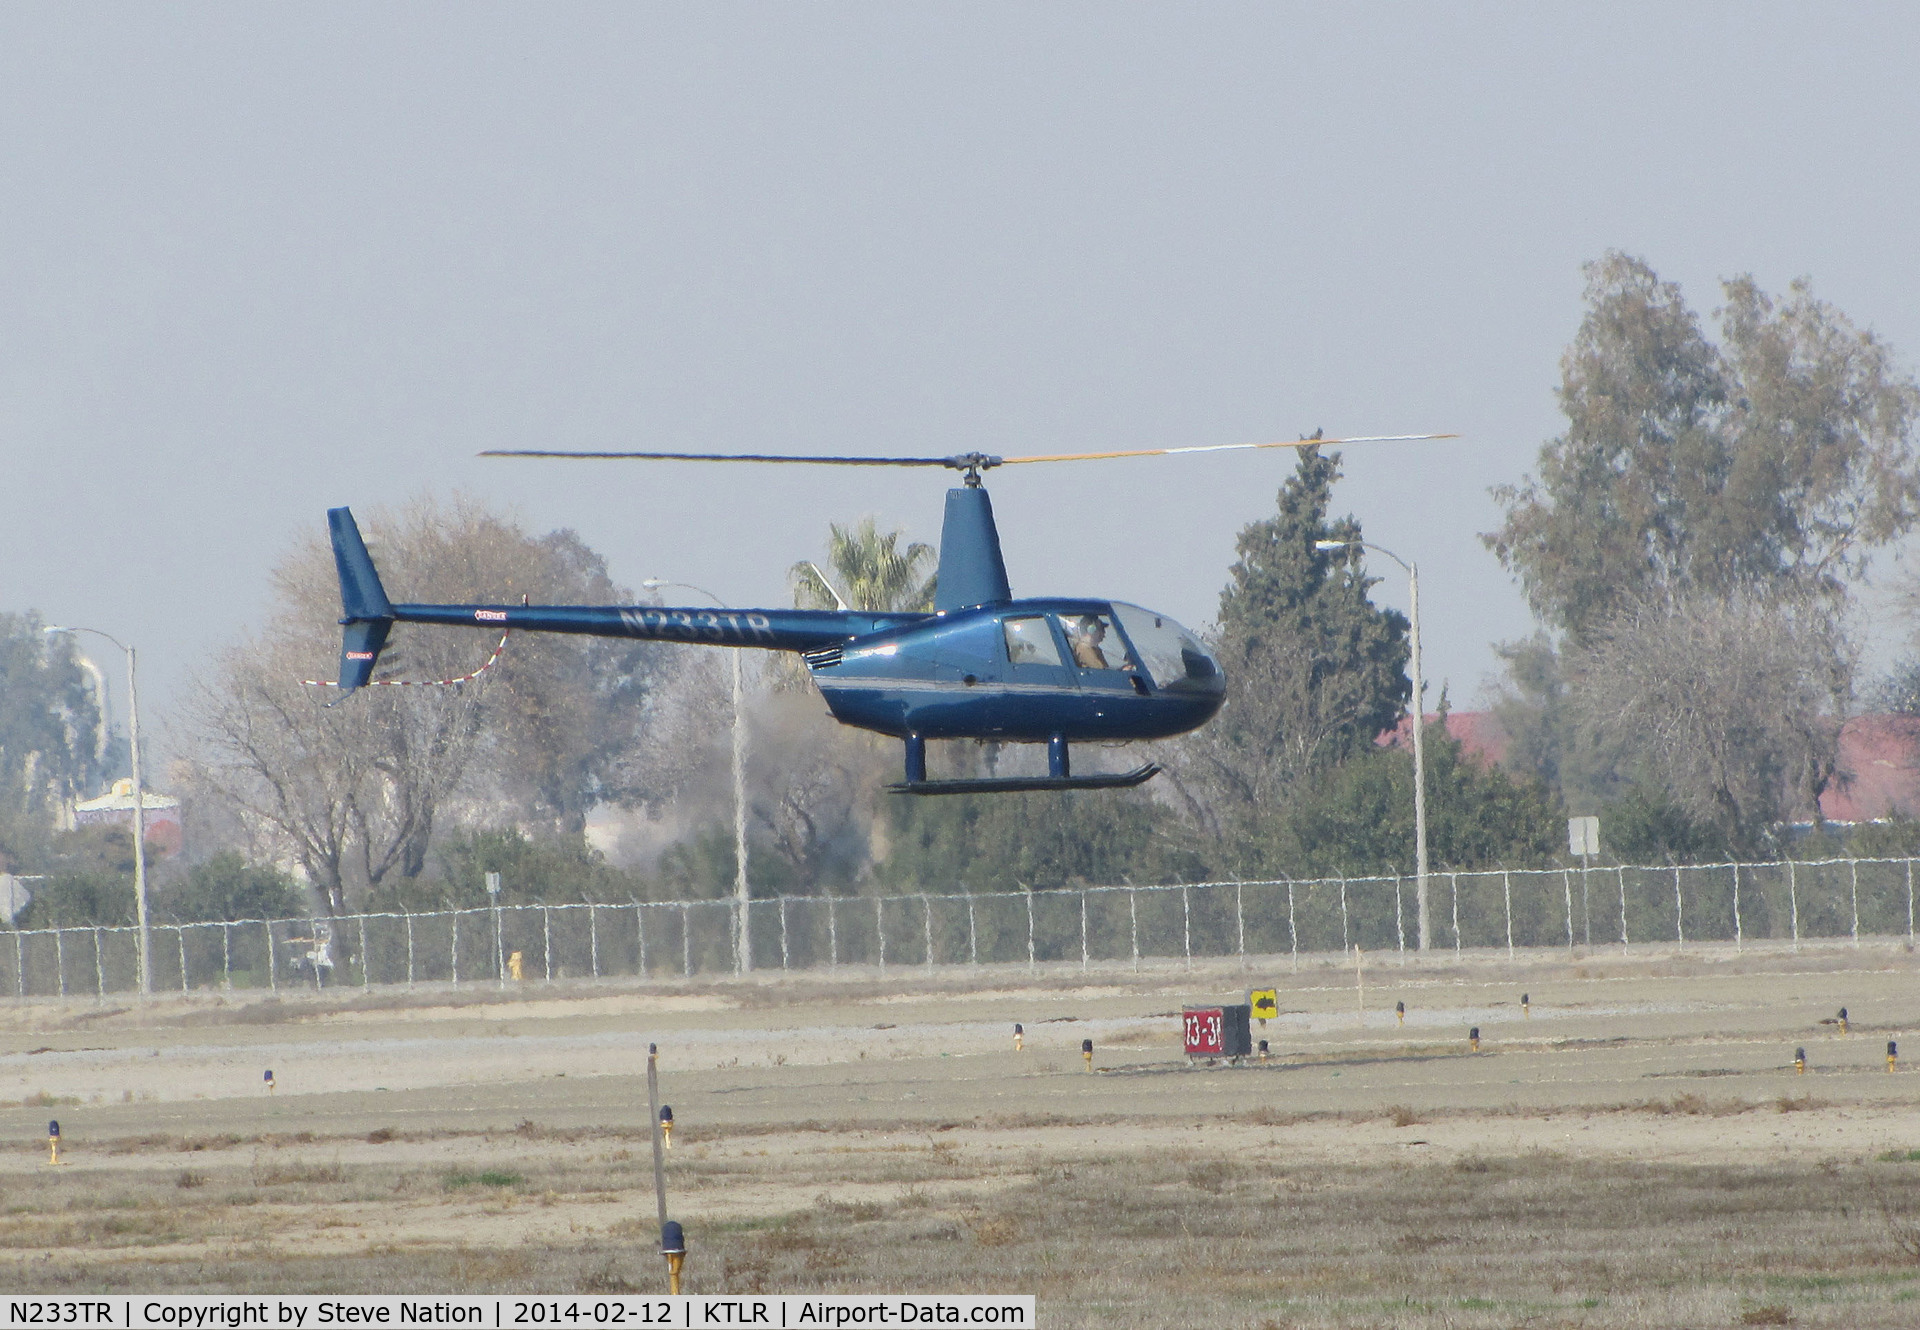 N233TR, 2003 Robinson R44 Raven II C/N 10062, Sierra Flite Robinson R44 II @ Mefford Field (Tulare, CA) for helicopter rides over the 2014 International Ag Expo